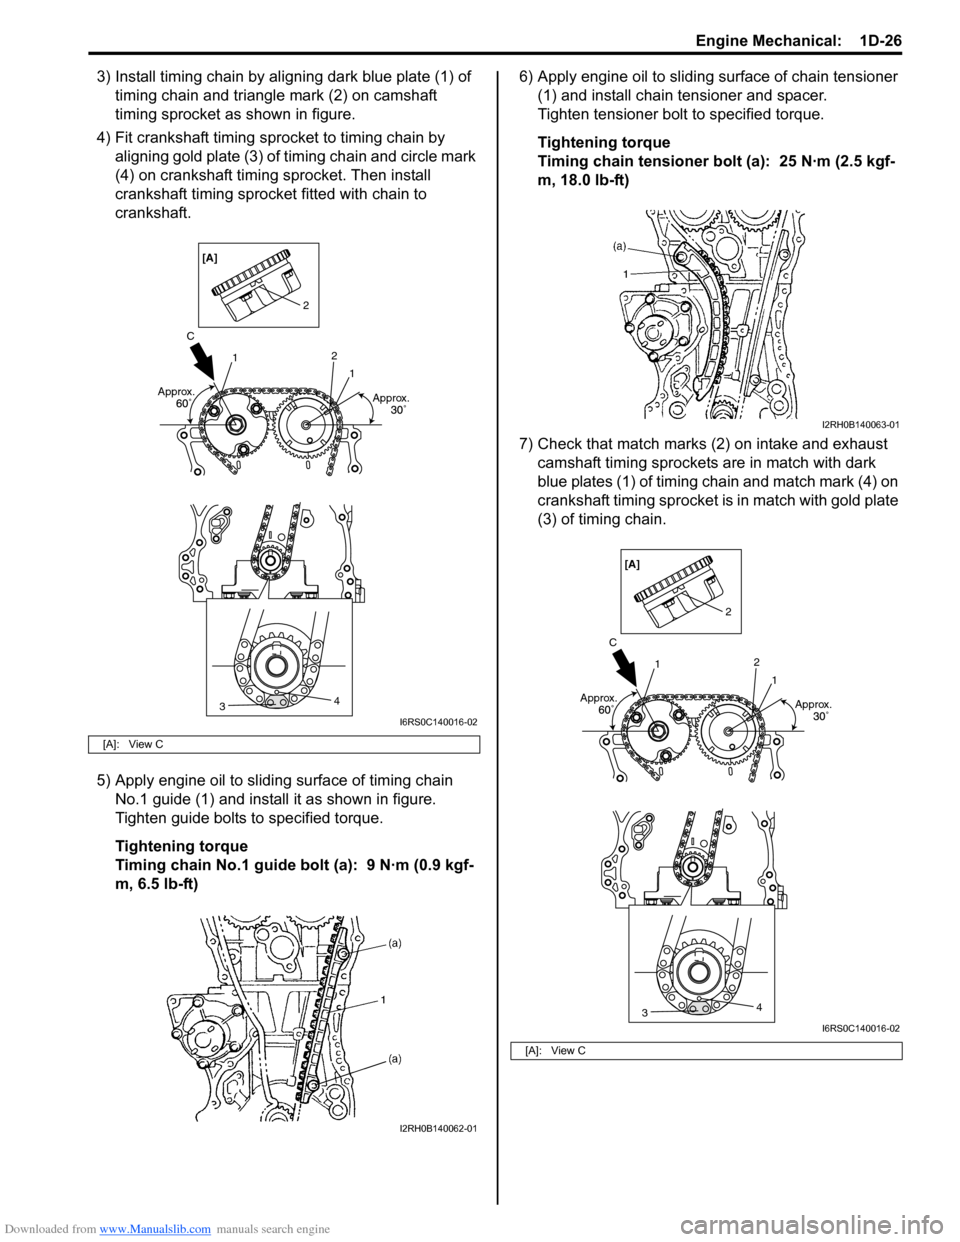 SUZUKI SWIFT 2006 2.G Service Workshop Manual Downloaded from www.Manualslib.com manuals search engine Engine Mechanical:  1D-26
3) Install timing chain by aligning dark blue plate (1) of timing chain and triangle mark (2) on camshaft 
timing spr